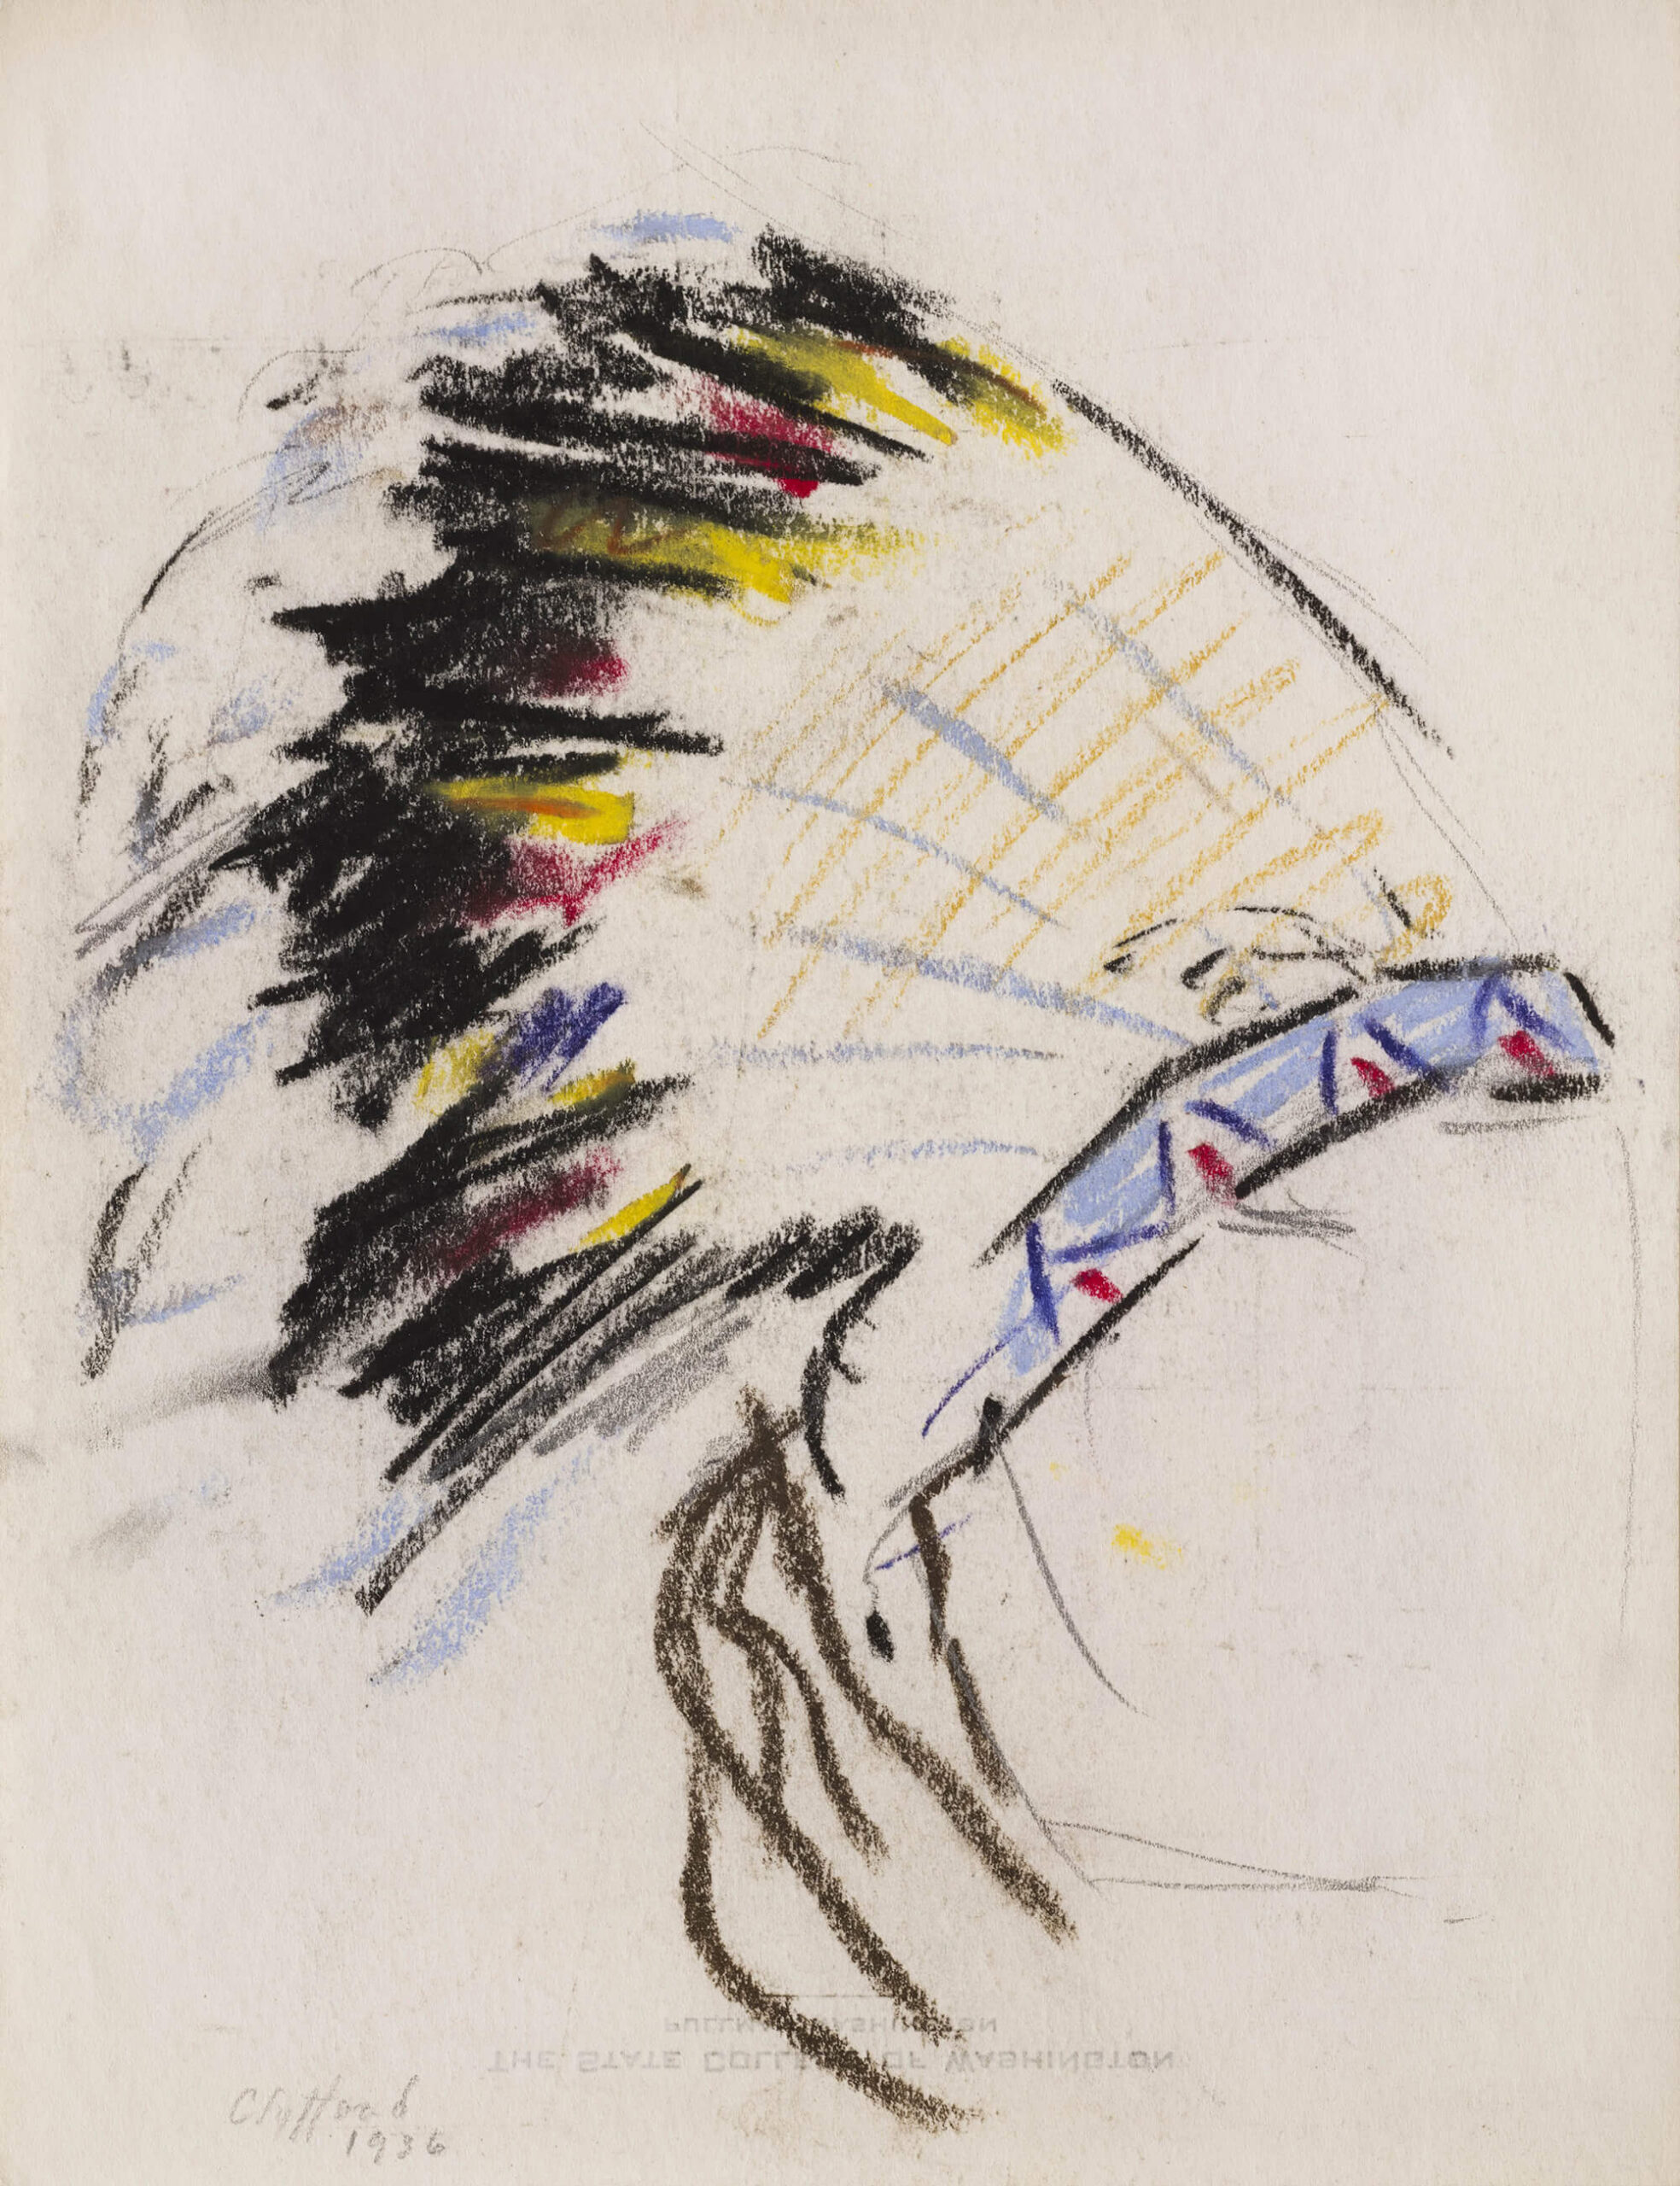 Pastel on paper drawing of a Native American headress